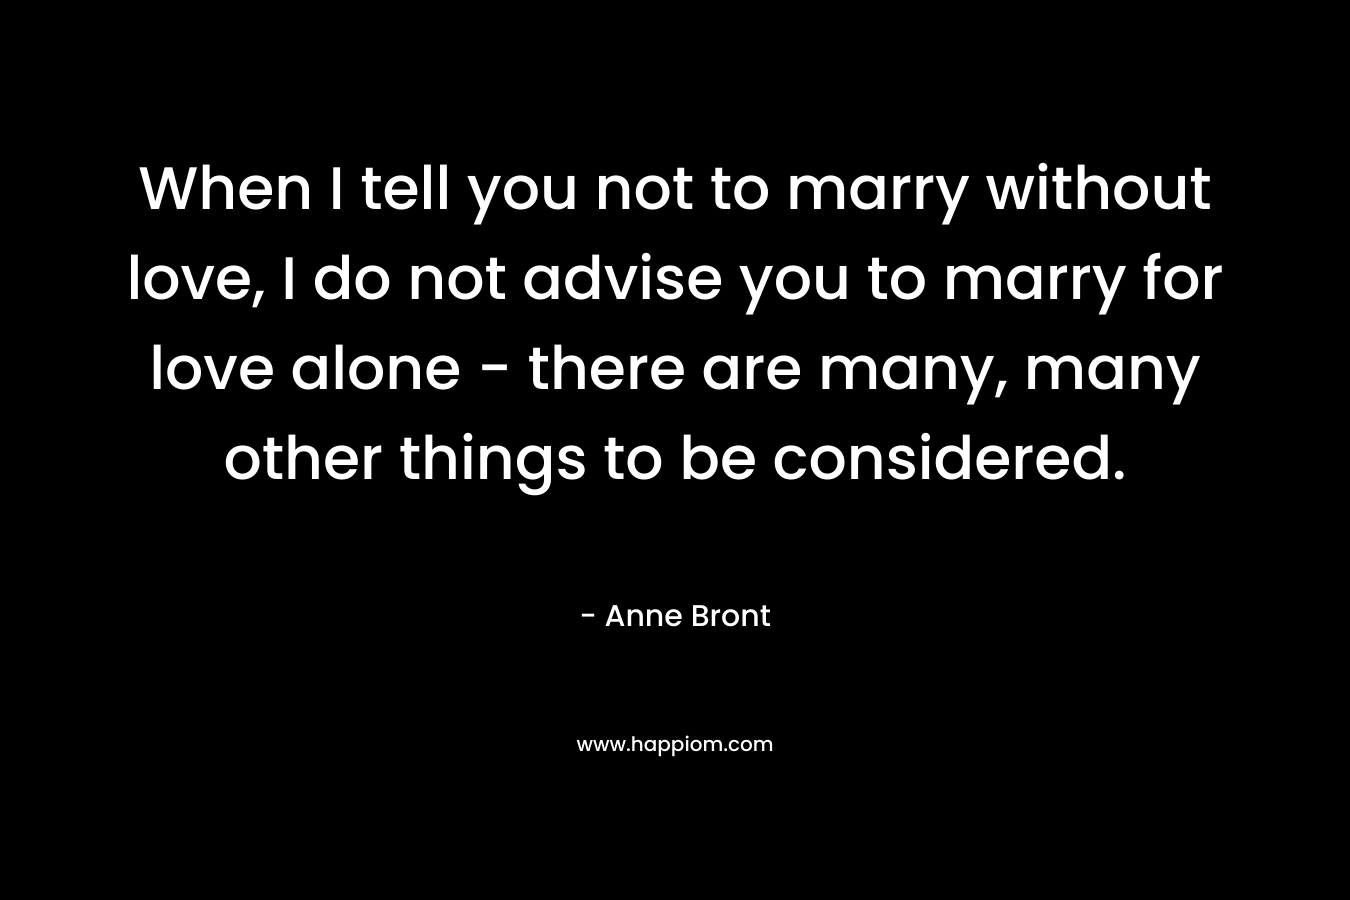 When I tell you not to marry without love, I do not advise you to marry for love alone - there are many, many other things to be considered.